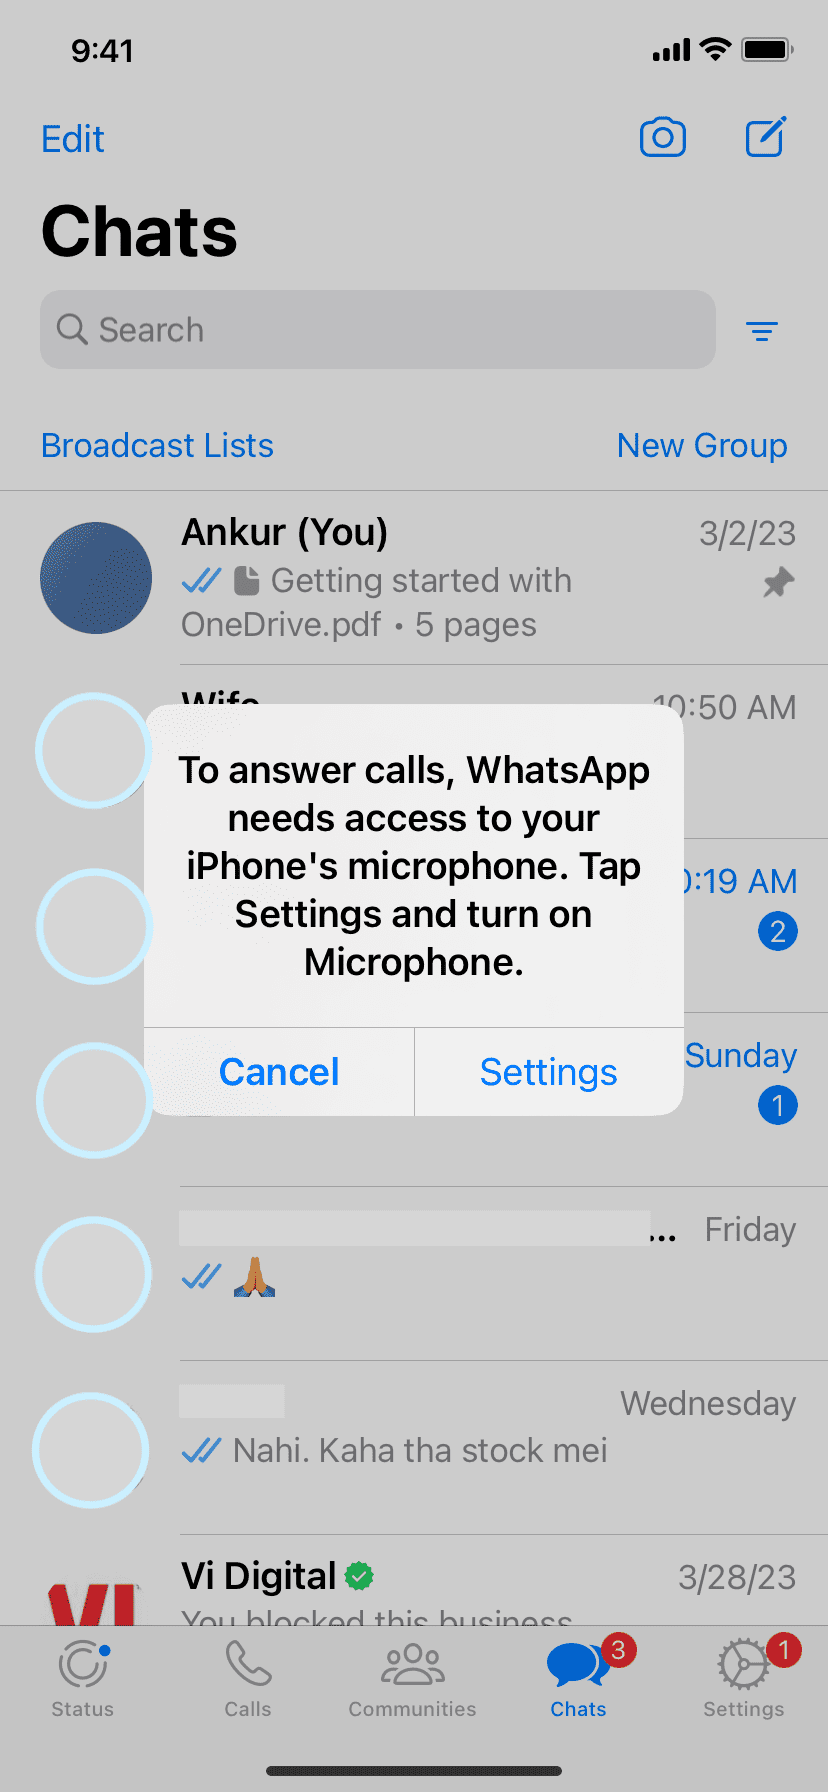 WhatsApp has no access to iPhone microphone, so tap Settings to allow it